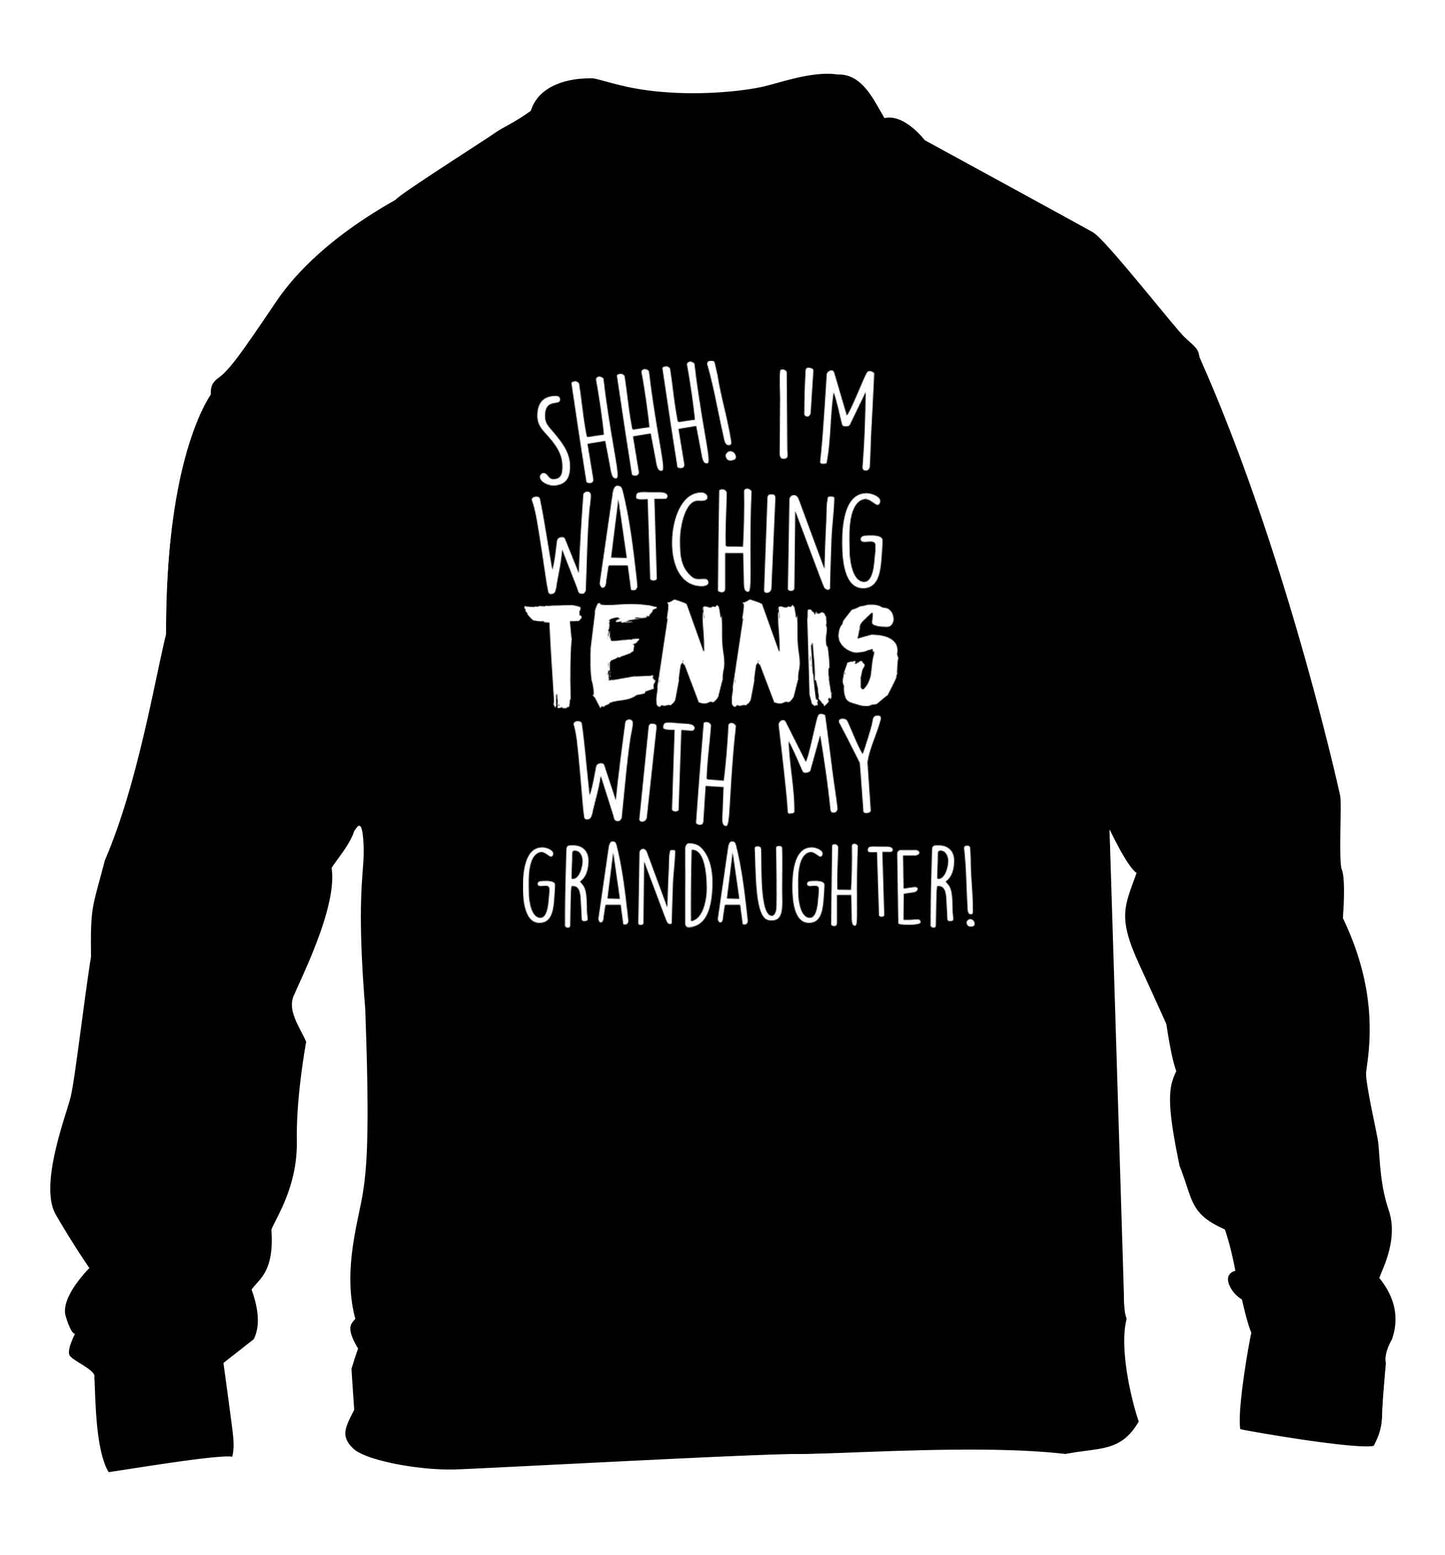 Shh! I'm watching tennis with my granddaughter! children's black sweater 12-13 Years